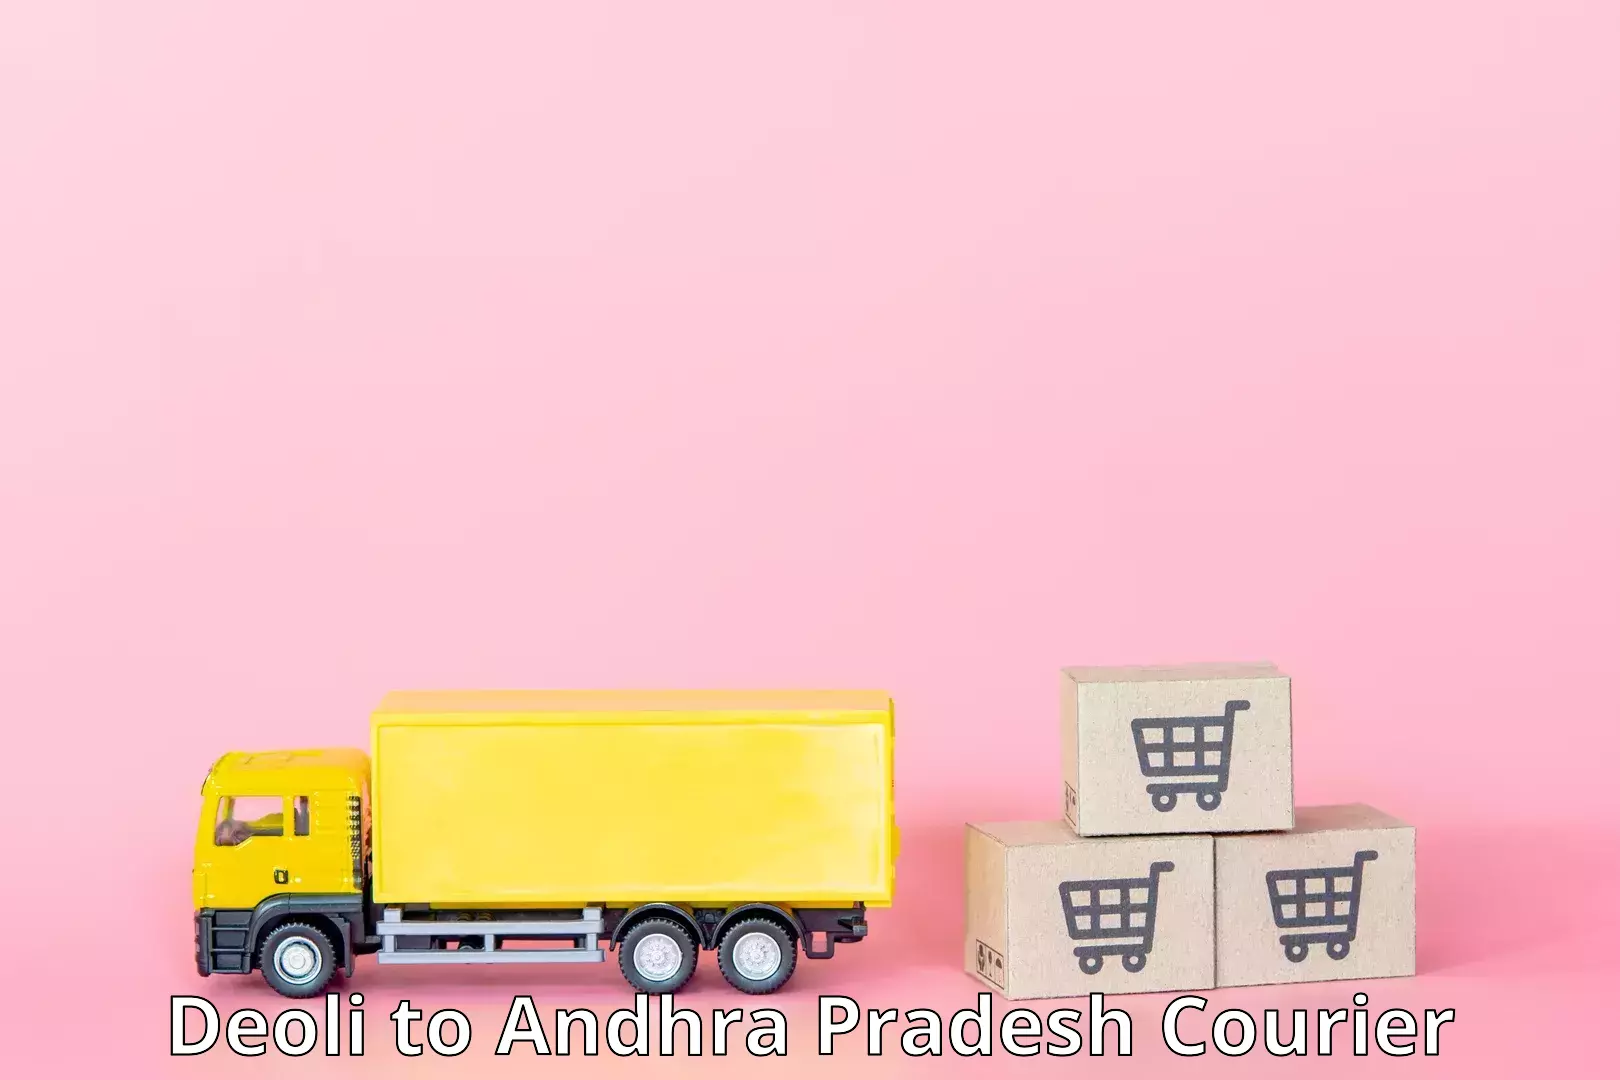 State-of-the-art courier technology in Deoli to Srikakulam